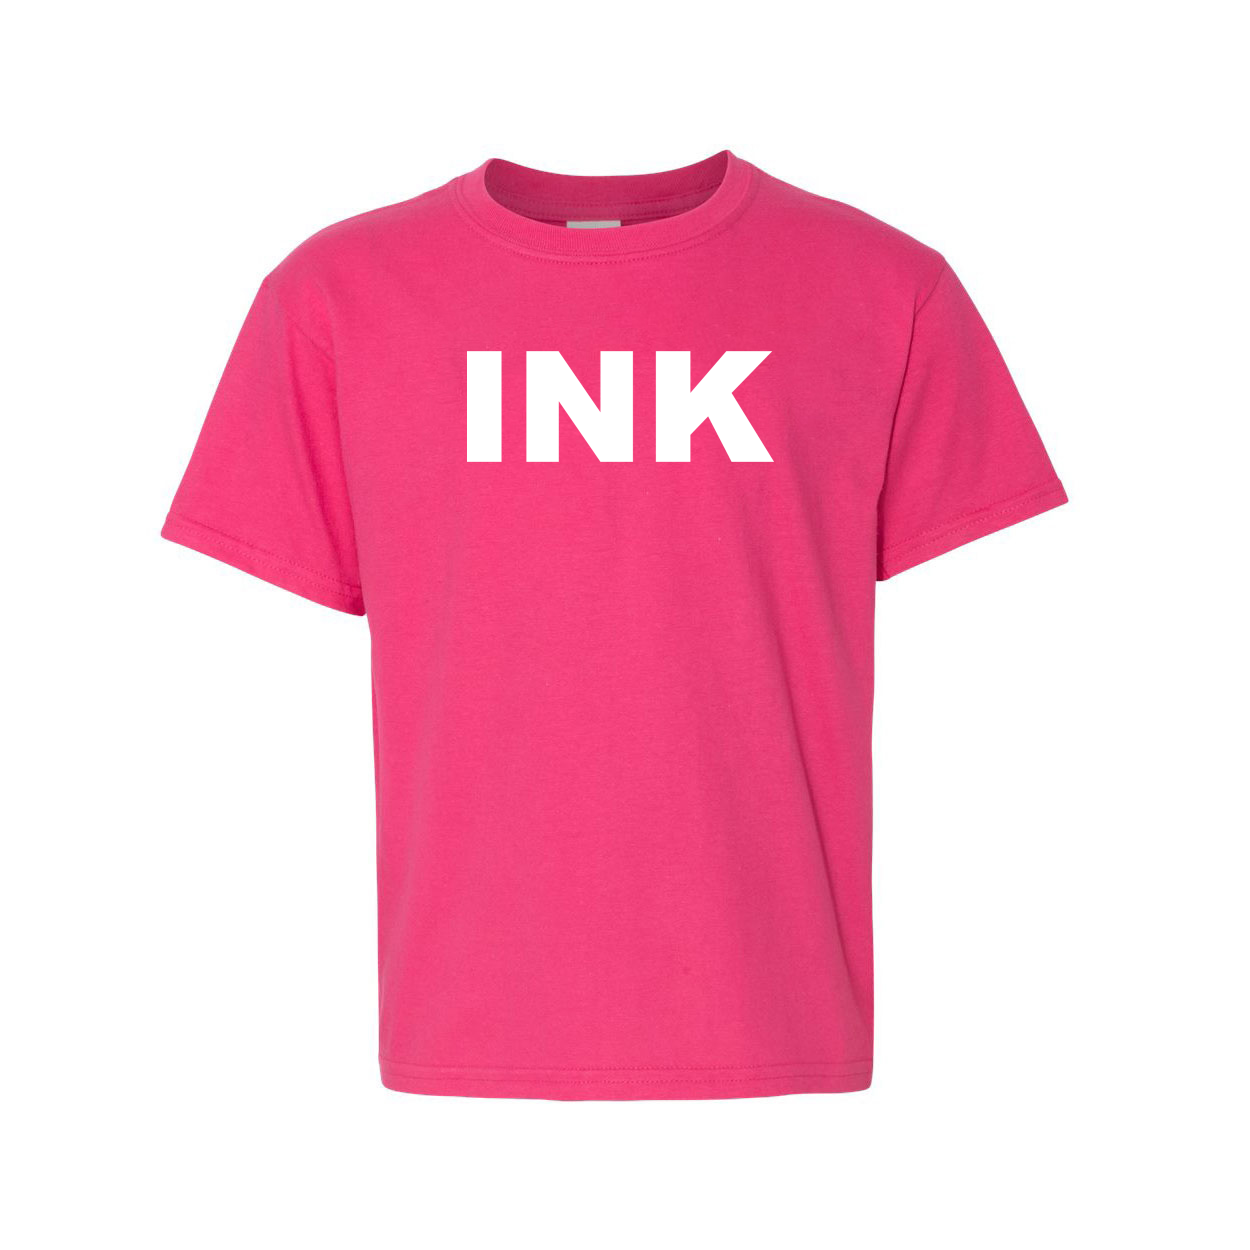 Ink Brand Logo Classic Youth T-Shirt Pink